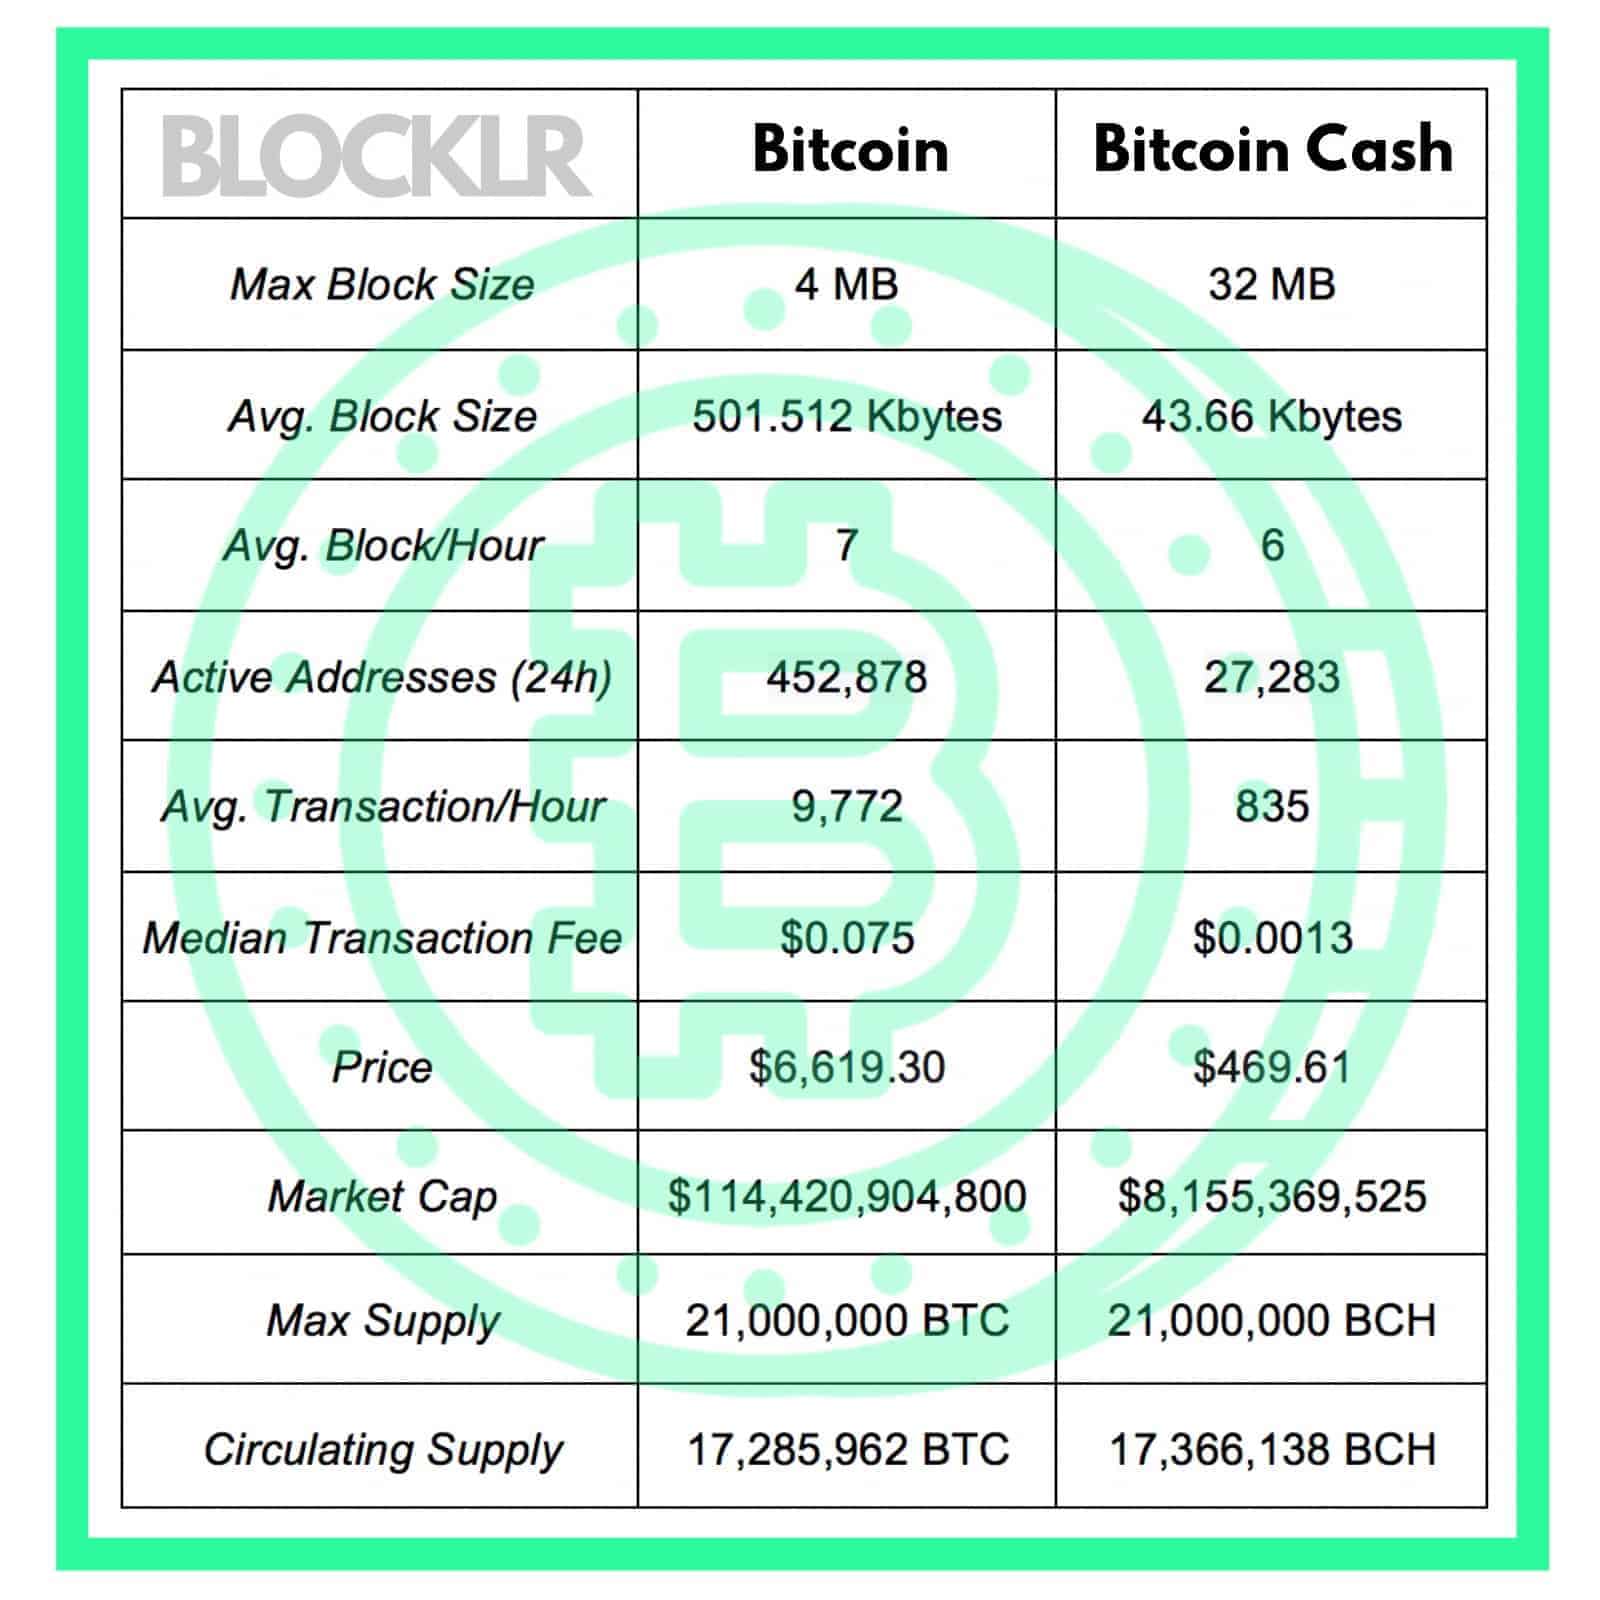 Bitcoin (BTC) vs Bitcoin Cash (BCH): What Are the ...